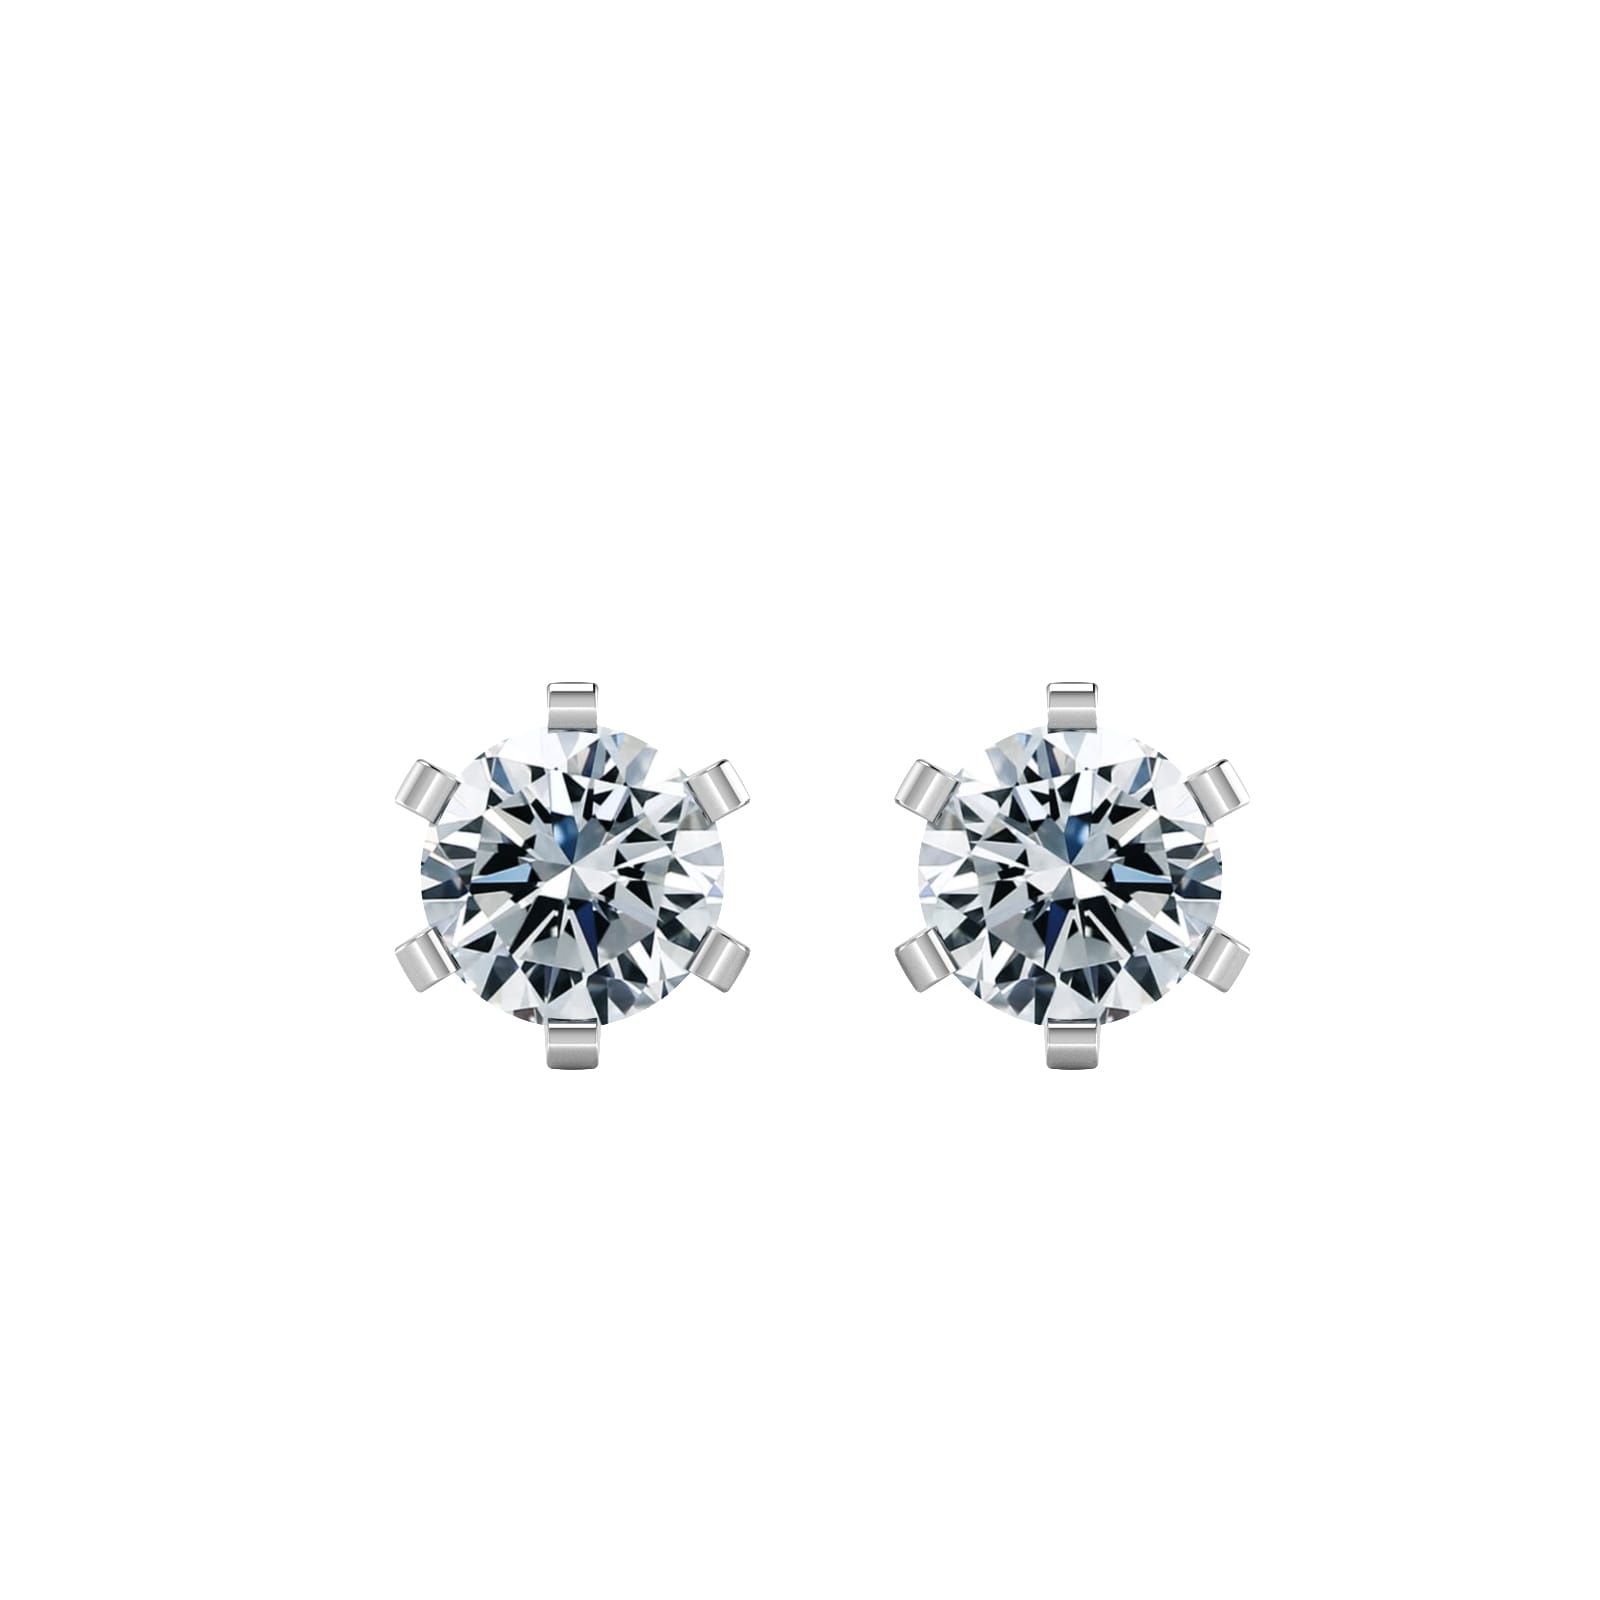 9ct White Gold 1.00cttw Solitaire Diamond Stud Earrings